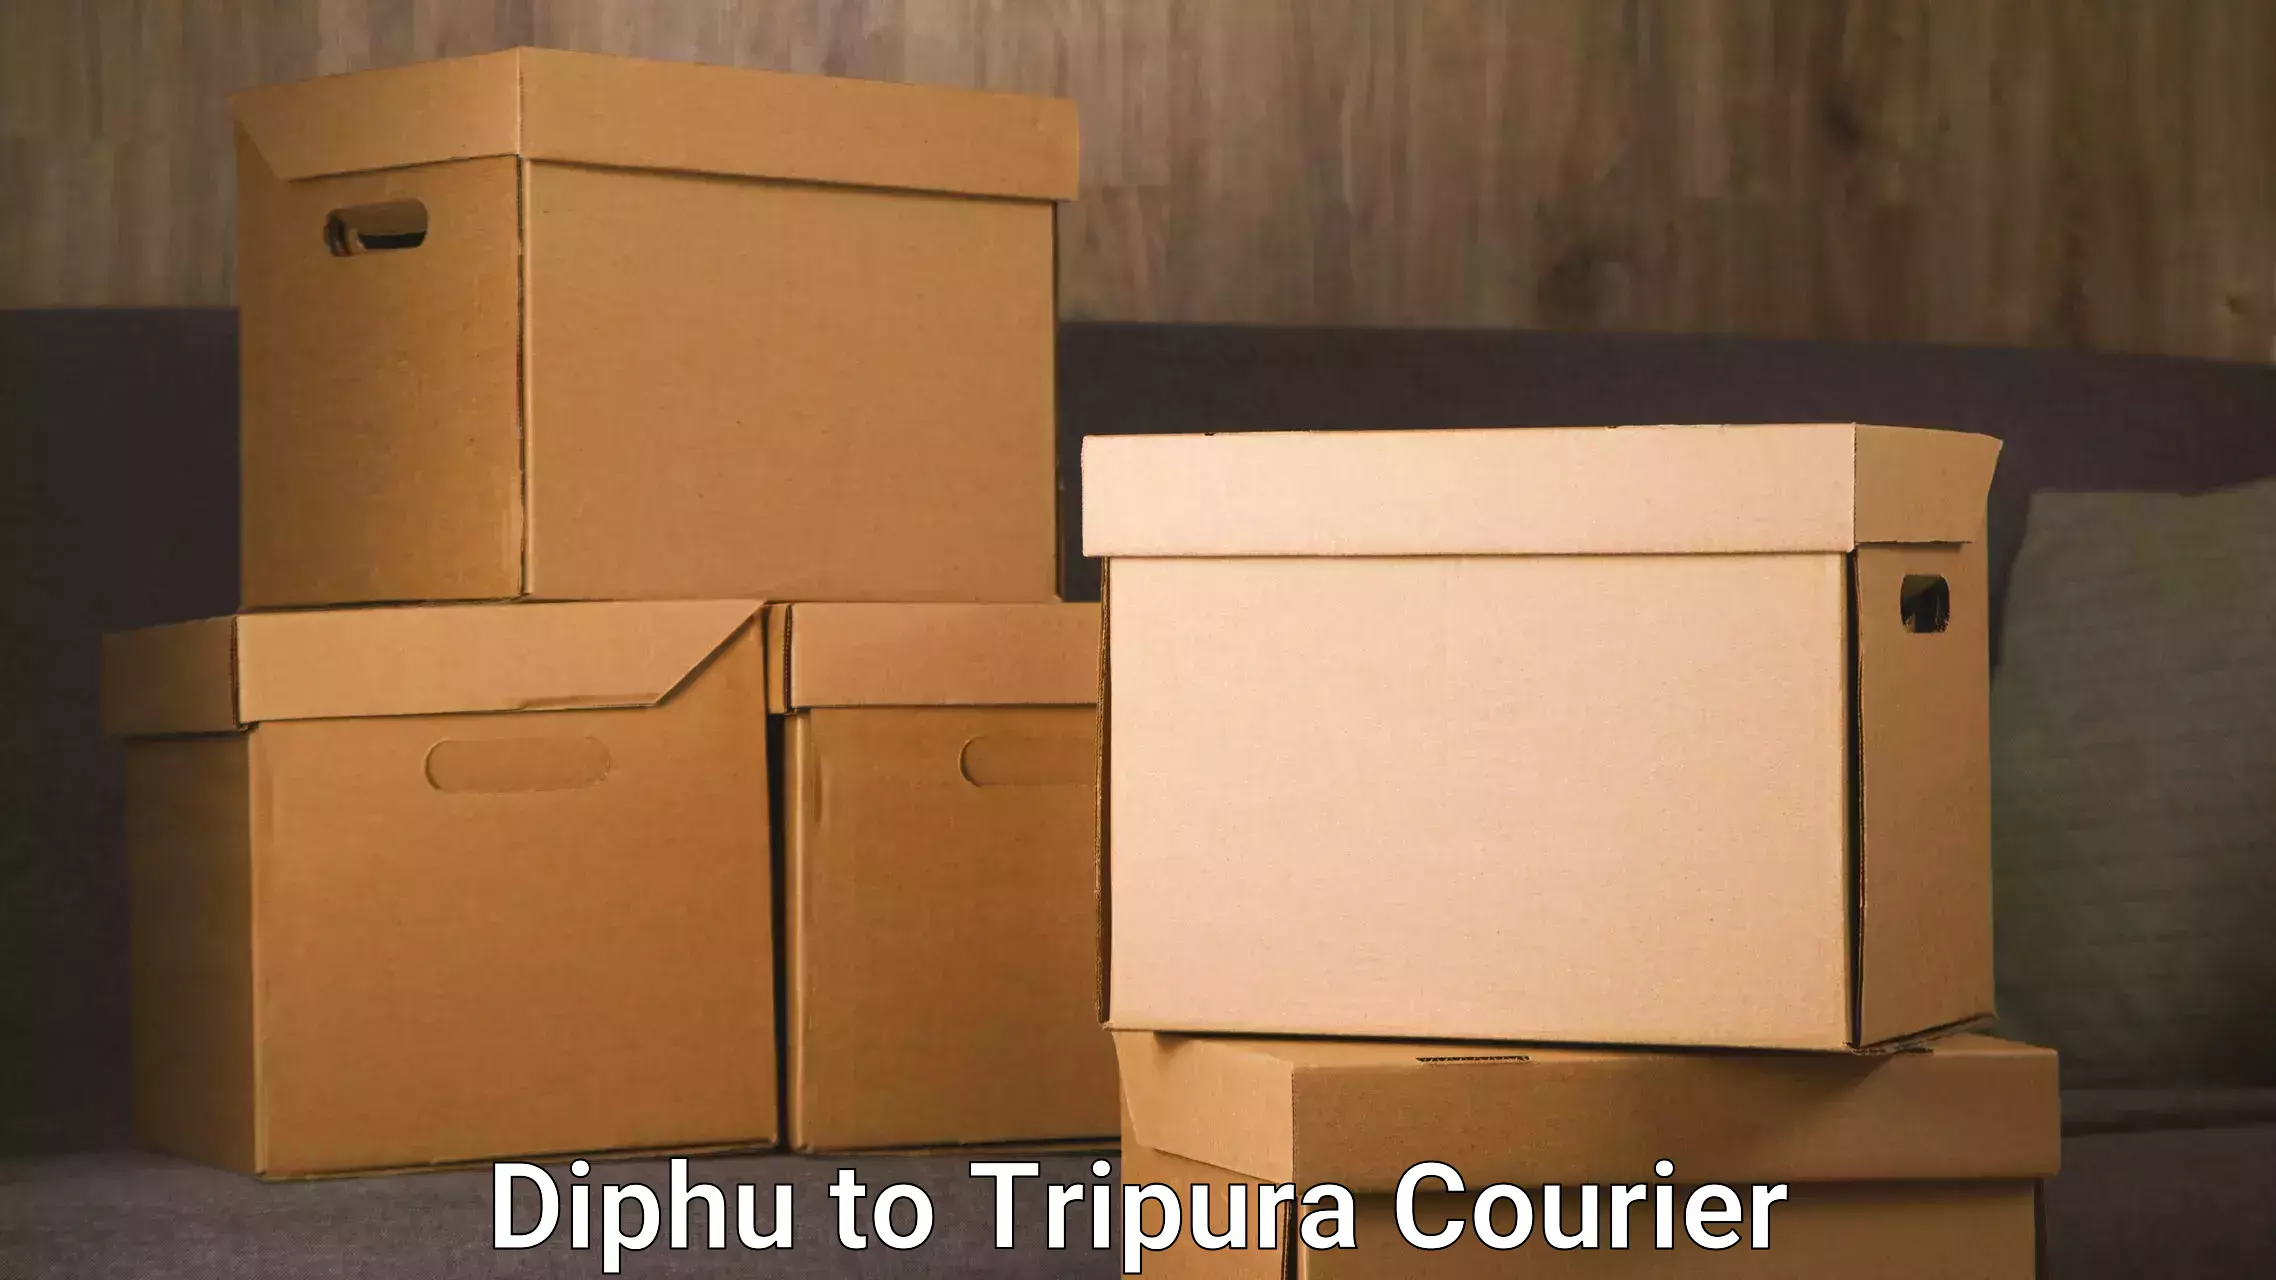 Smart shipping technology in Diphu to Kailashahar